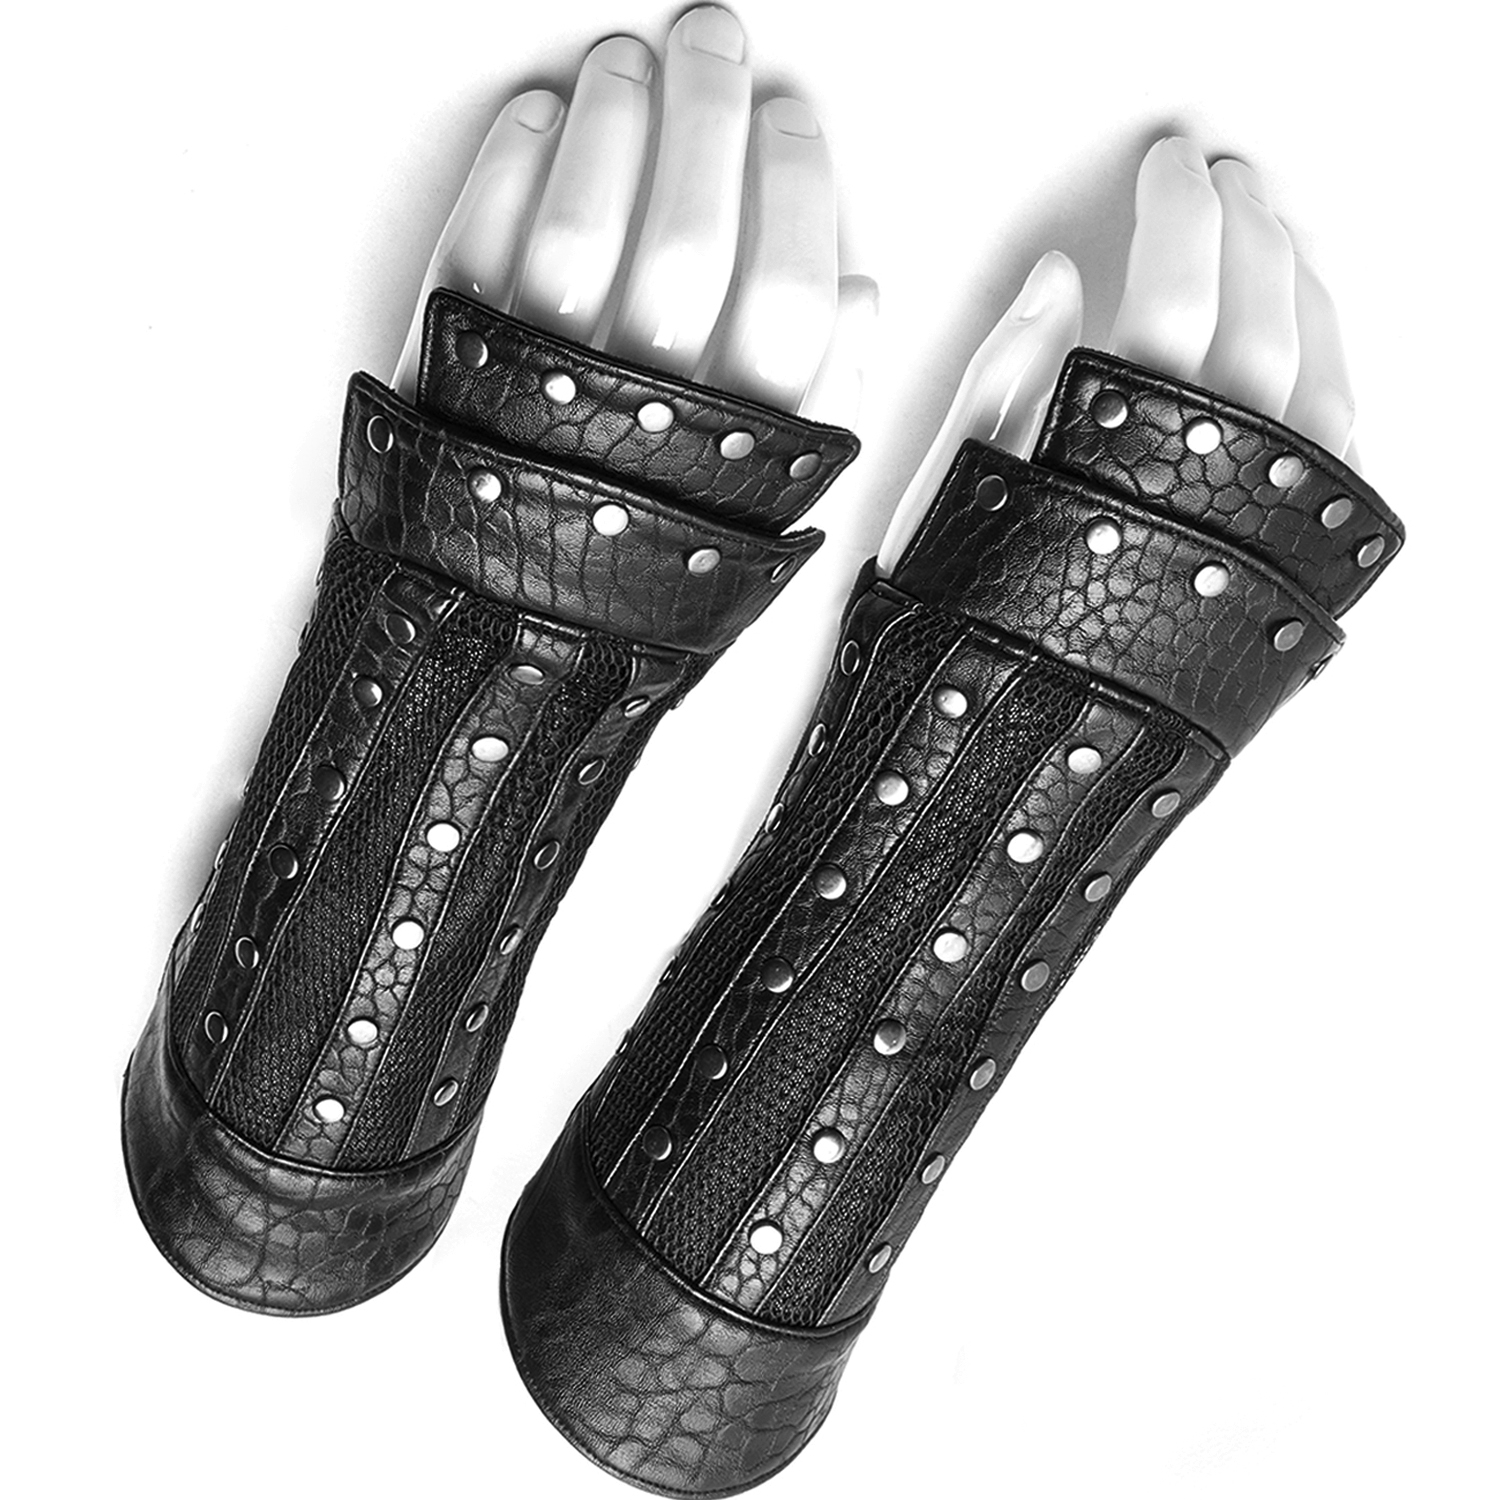 Mad Max Bracer Post-apocalyptic Forearm Guard Leather 